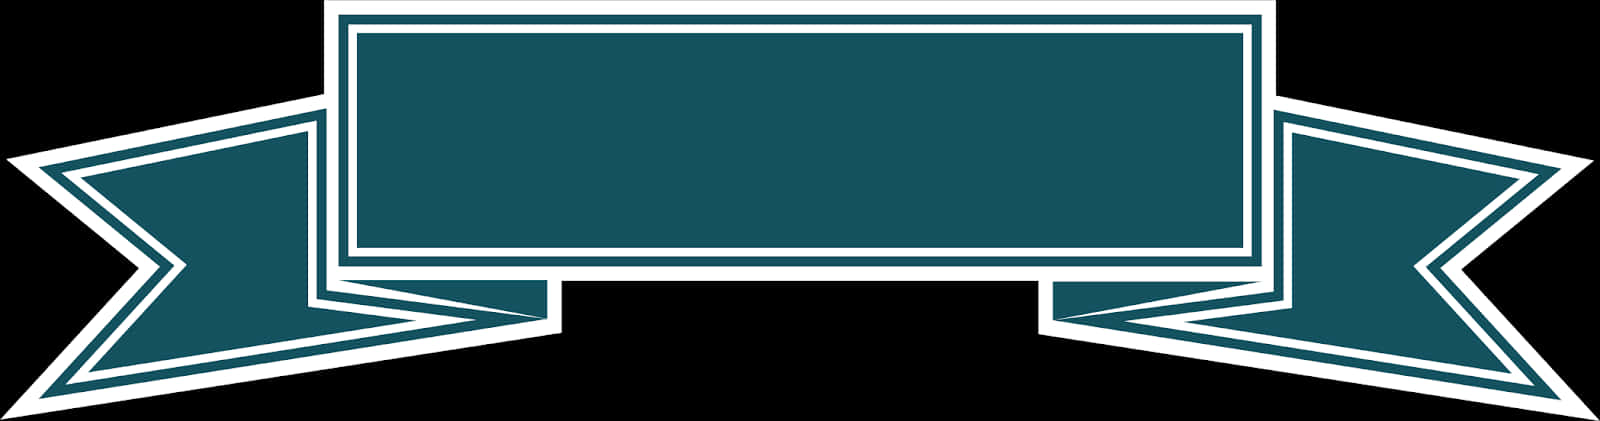 Teal Accented Blank Banner Design PNG image